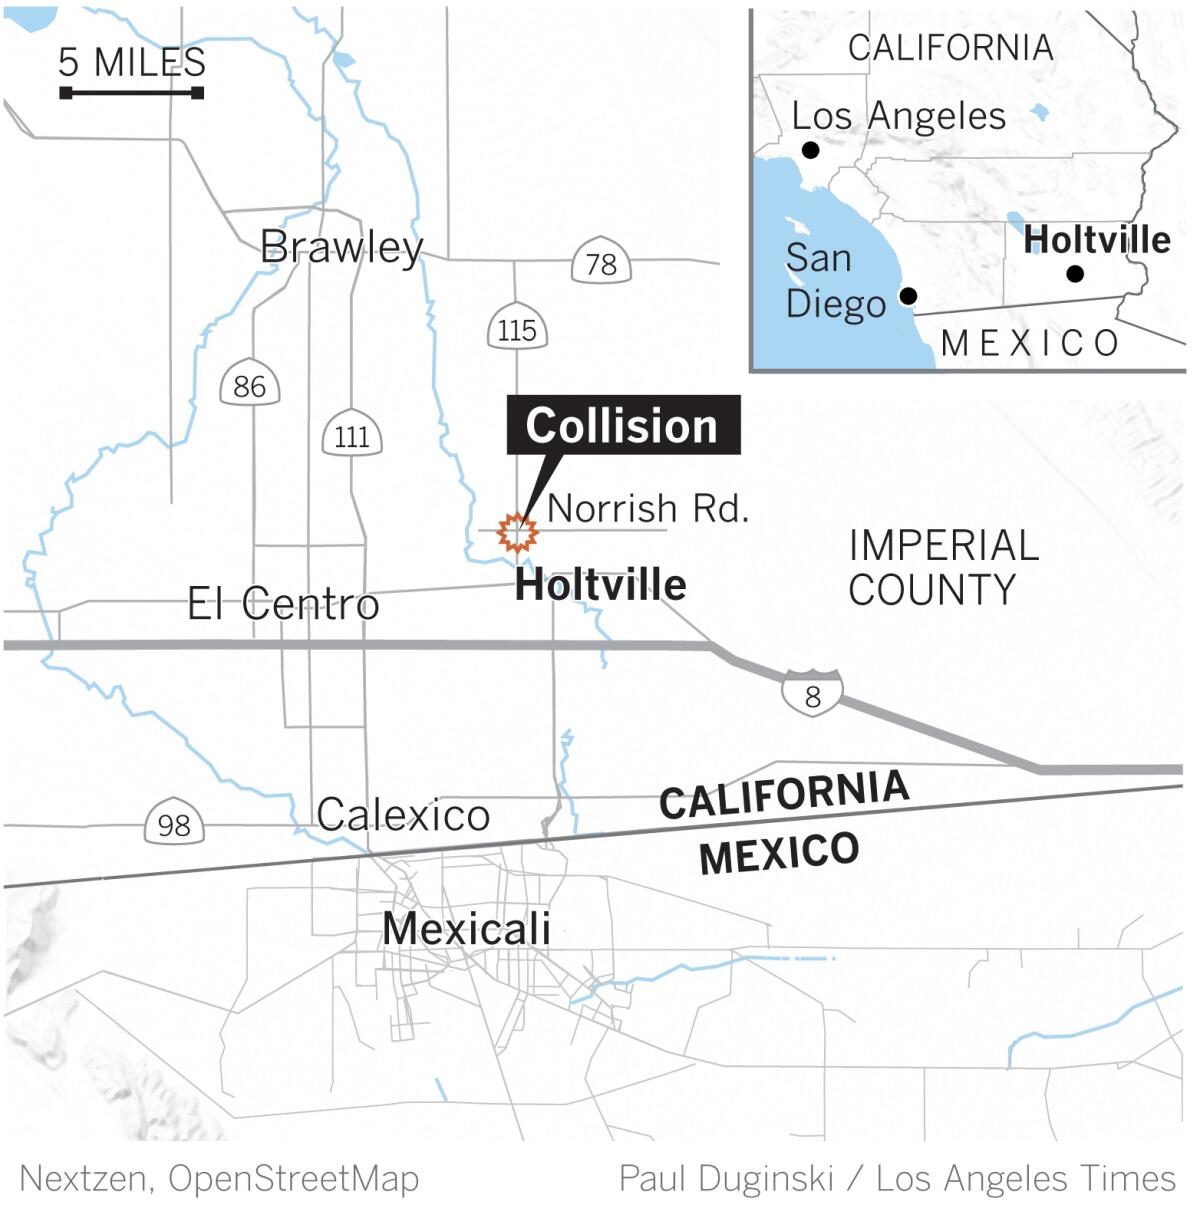 Location of deadly collision in Imperial County.